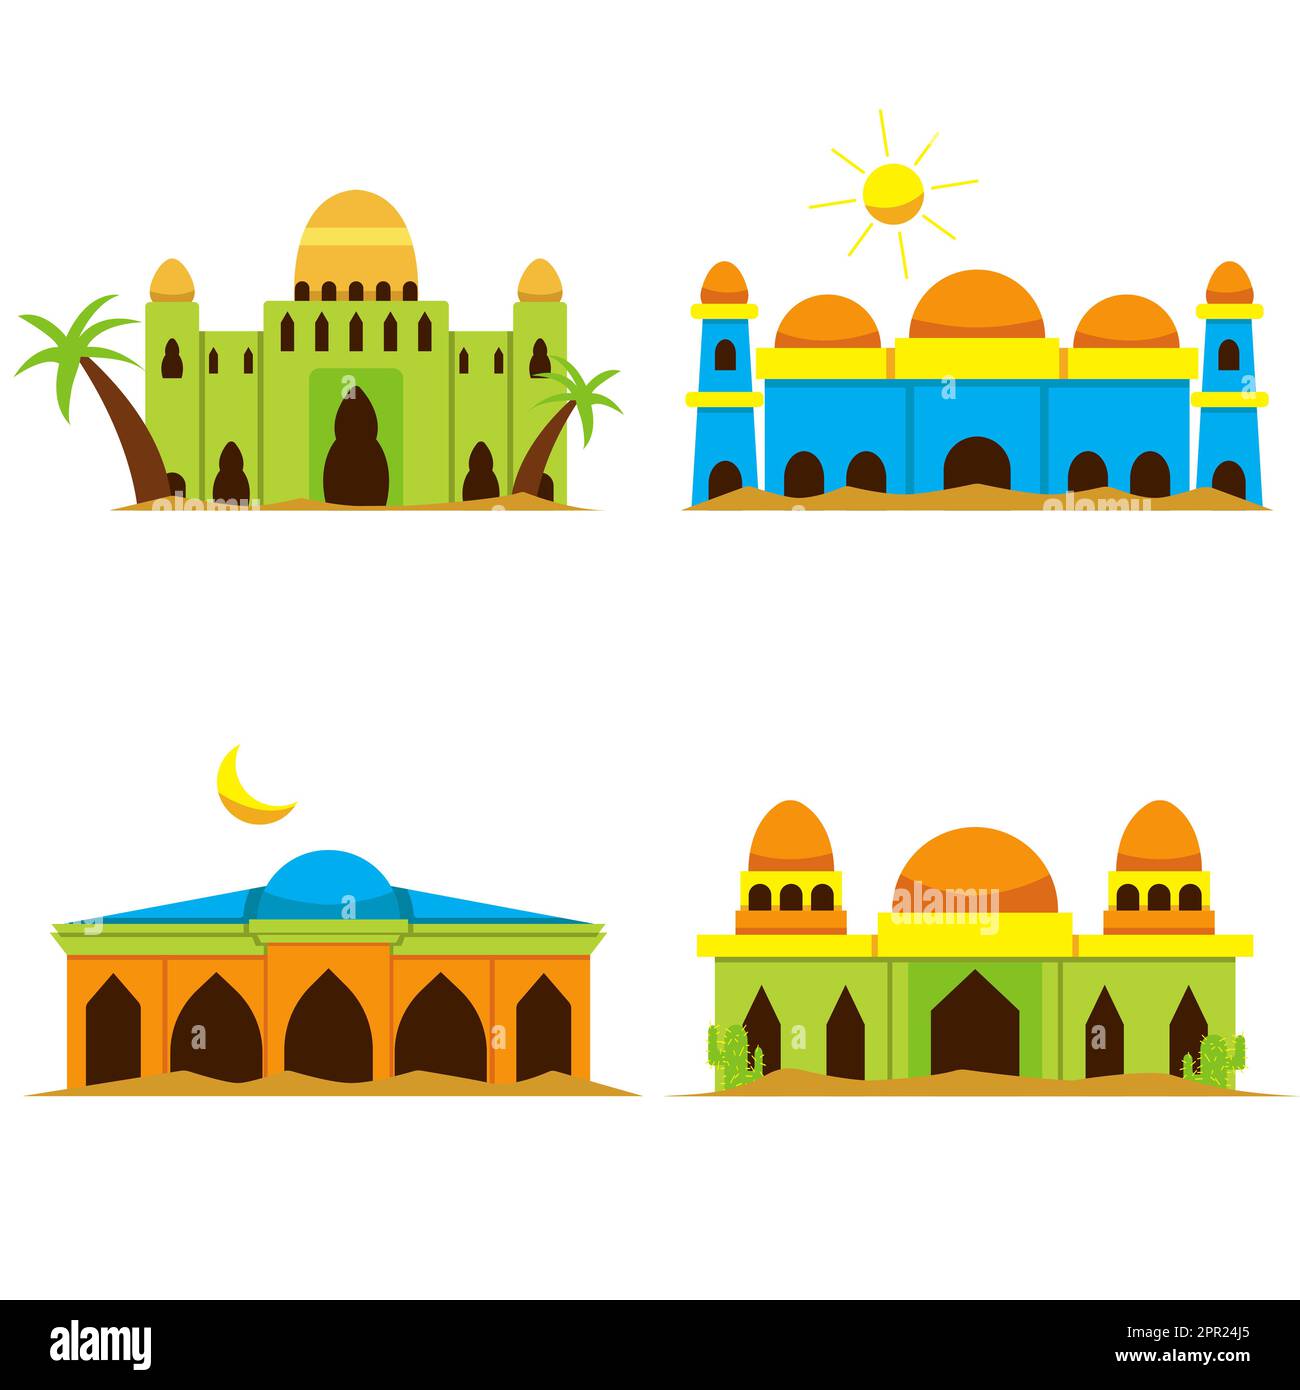 a set of vector illustrations of a mosque Stock Vector